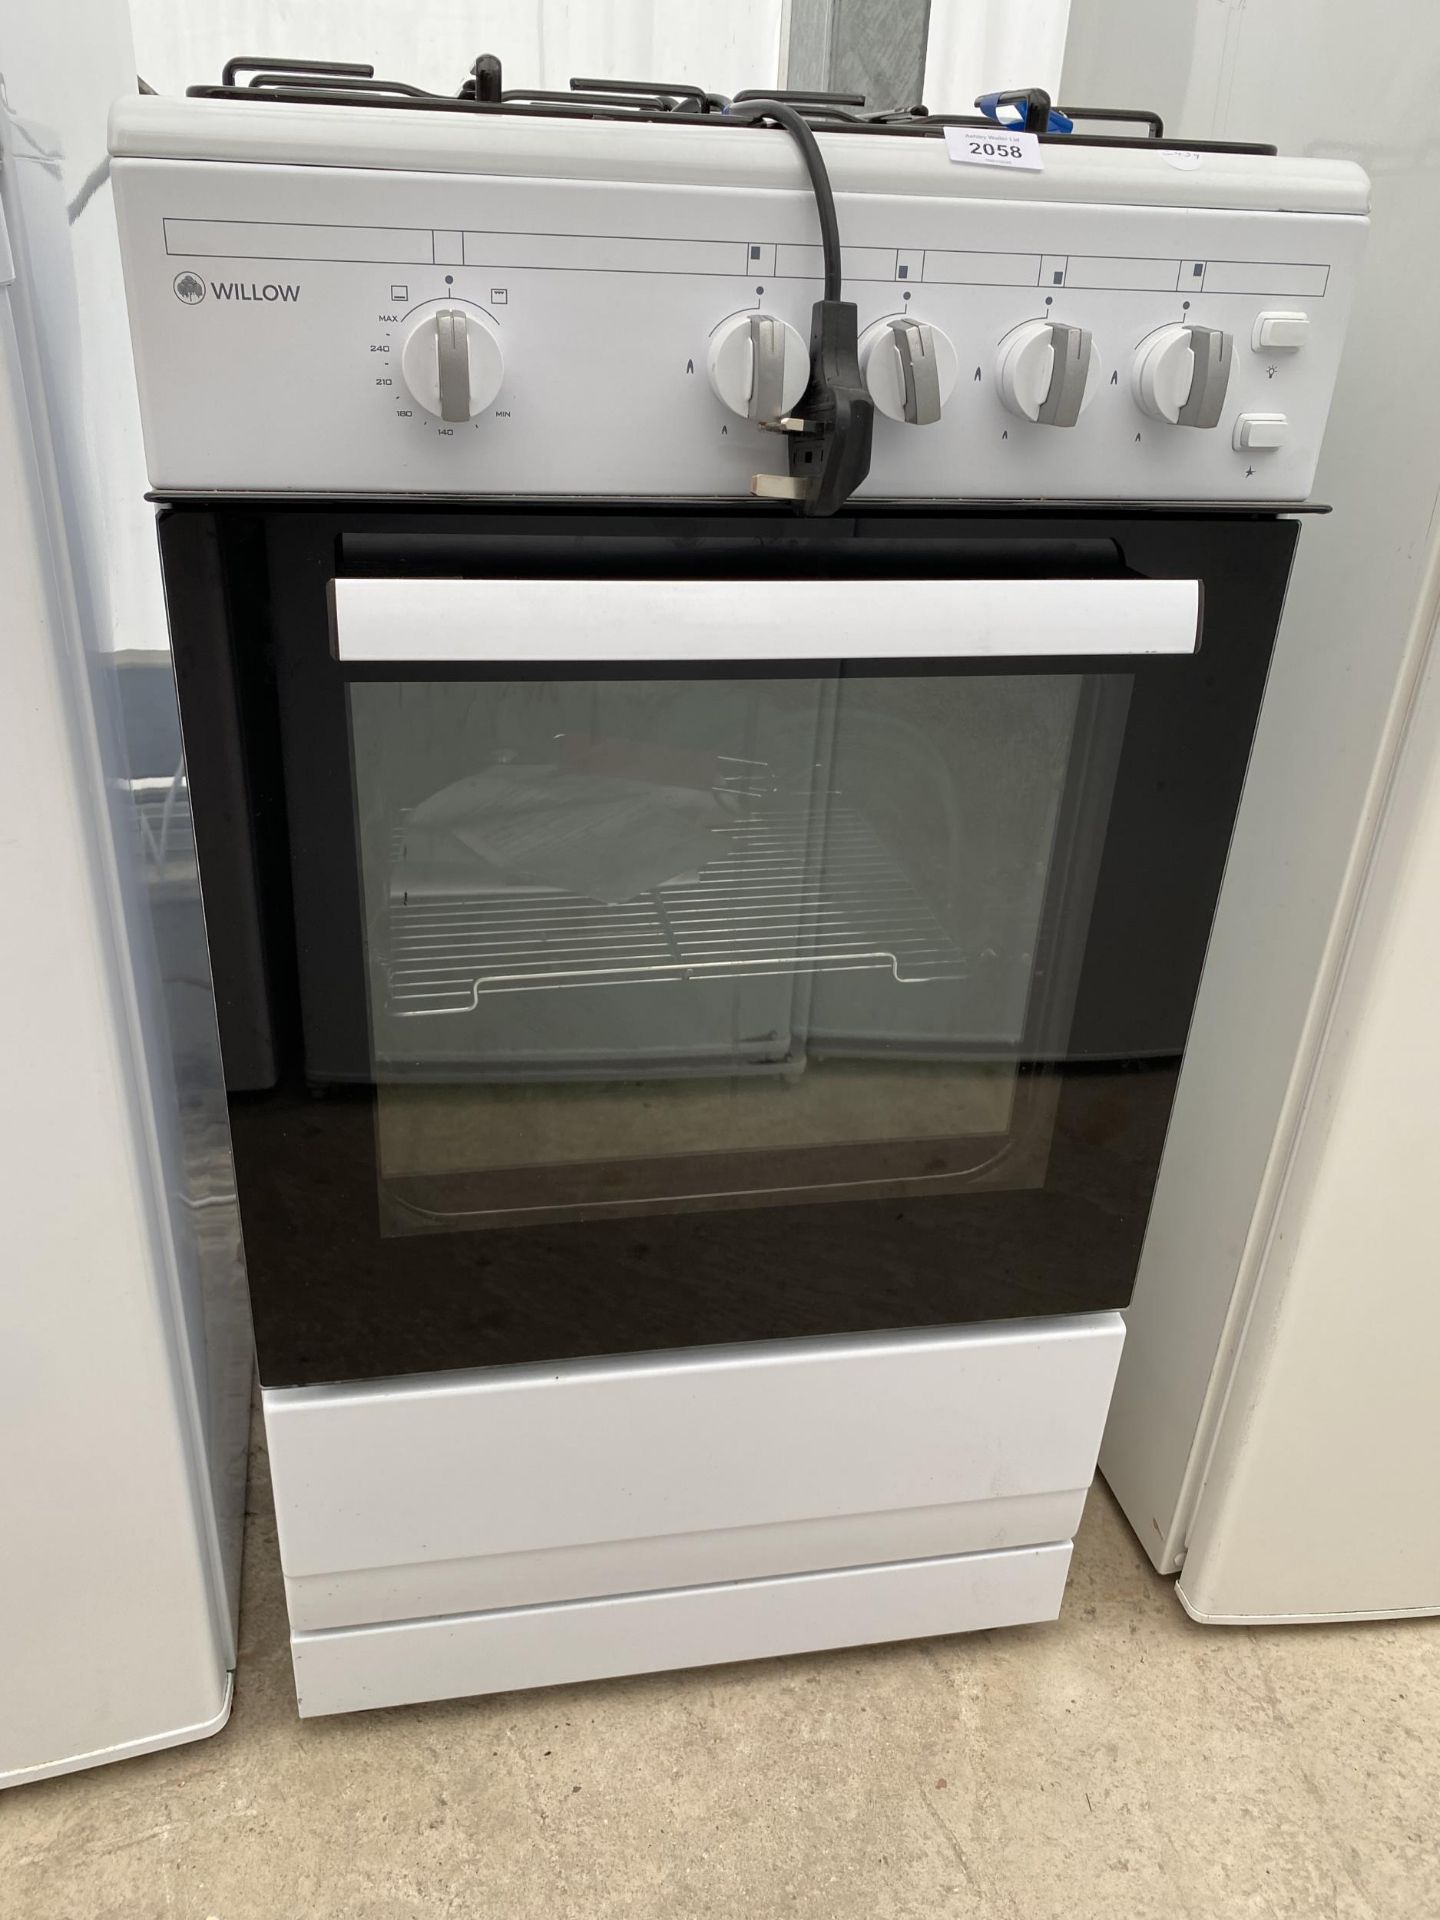 A WHITE AND BLACK WILLOW ELECTRIC AND GAS OVEN AND HOB - Image 2 of 5